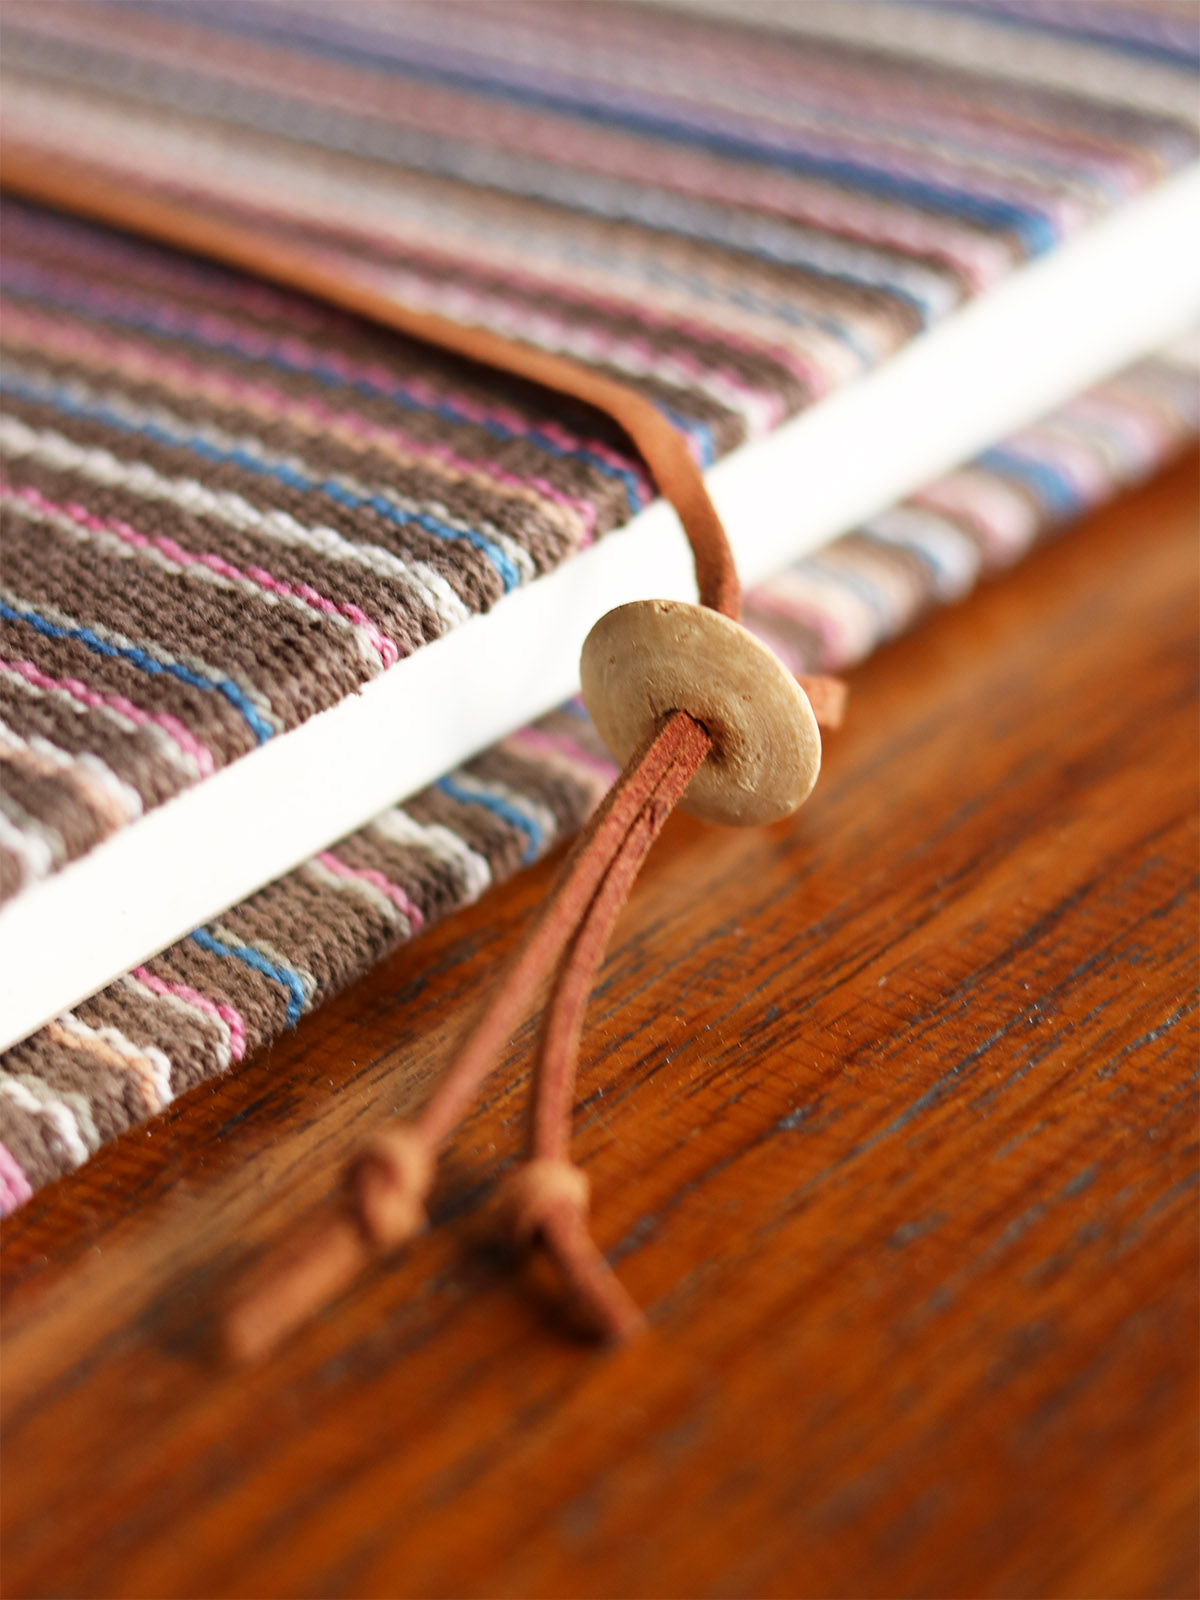 Handcrafted Notebook with Handwoven Cotton Cover and Leather Strap - Mitzie Mee Shop